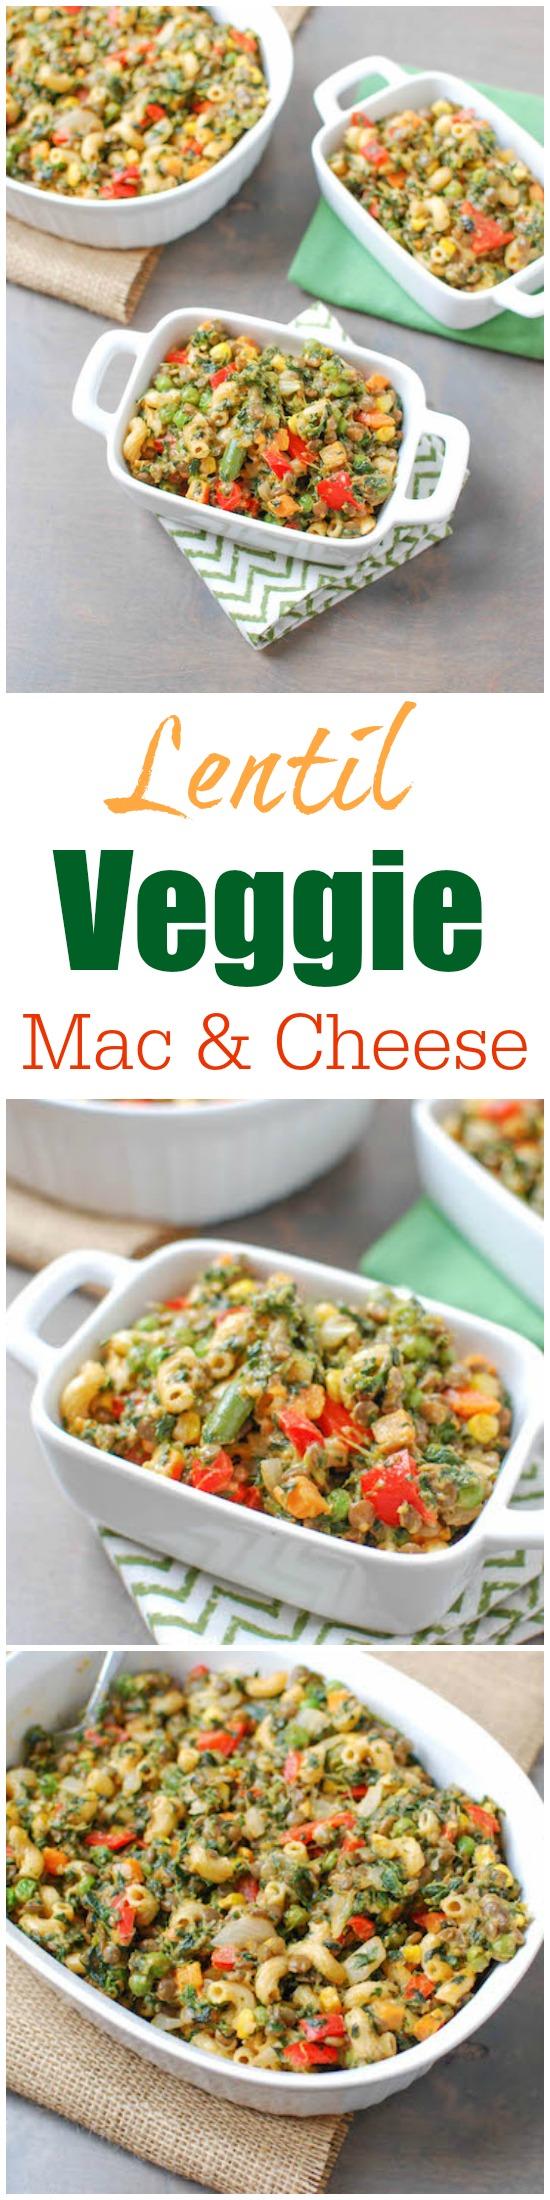 A childhood favorite kicked up a notch! This Lentil Macaroni and Cheese is packed with vegetables and lentils for a hearty vegetarian meal. 